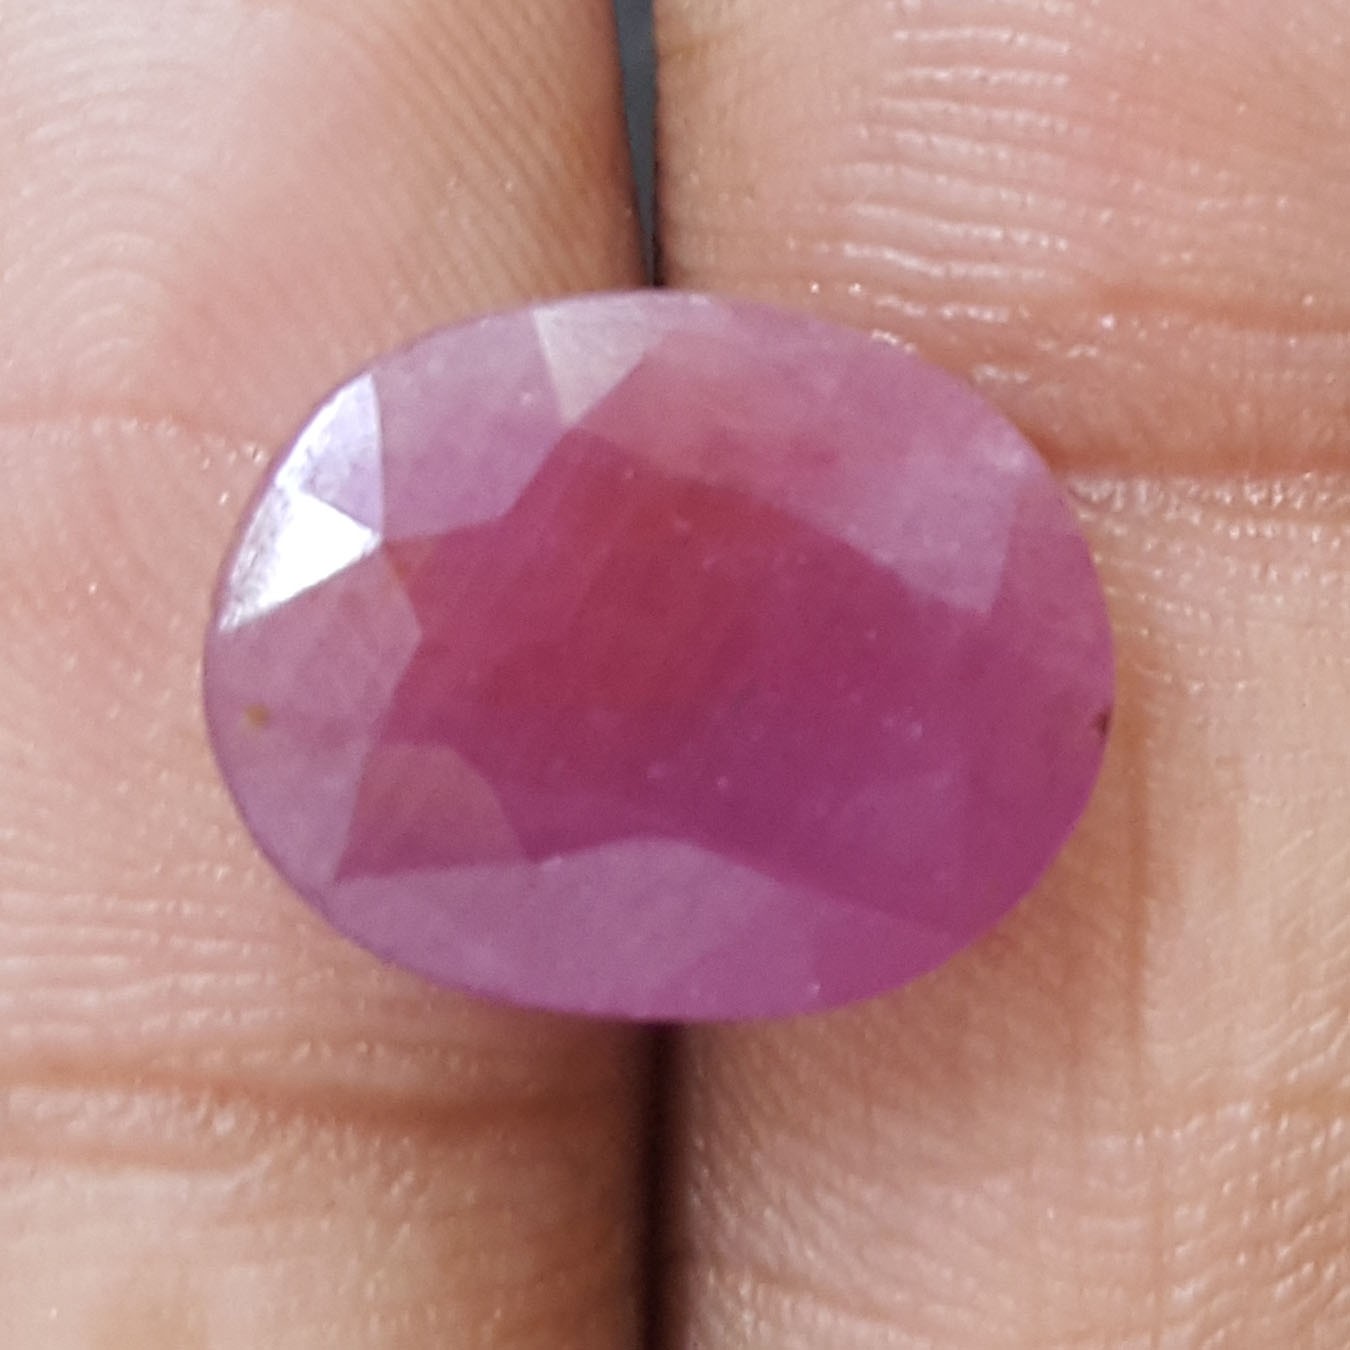 10.18 Ratti Natural Neo Burma Ruby with Govt Lab Certificate-(3441)